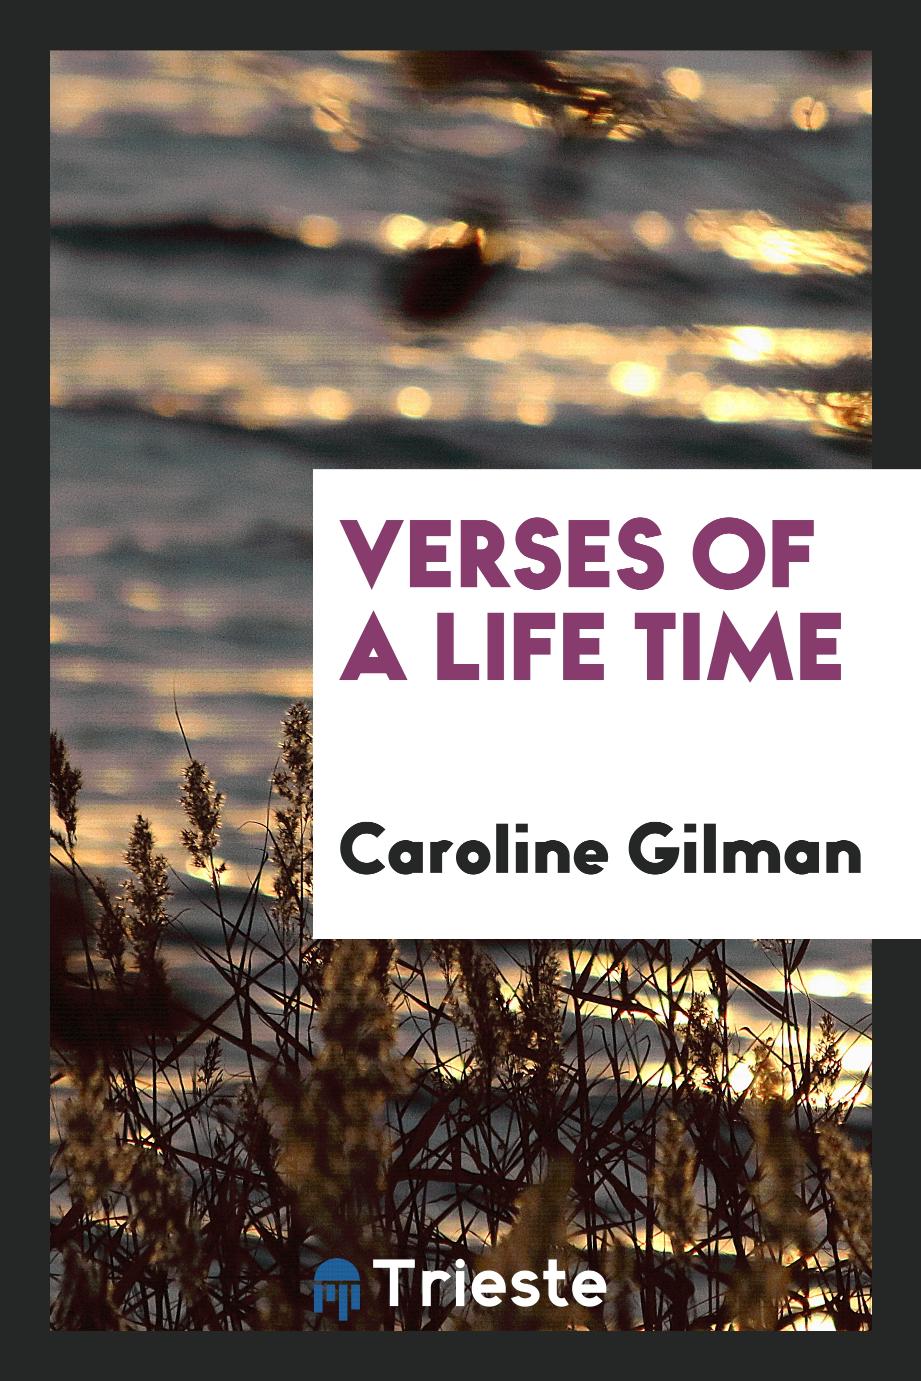 Verses of a life time